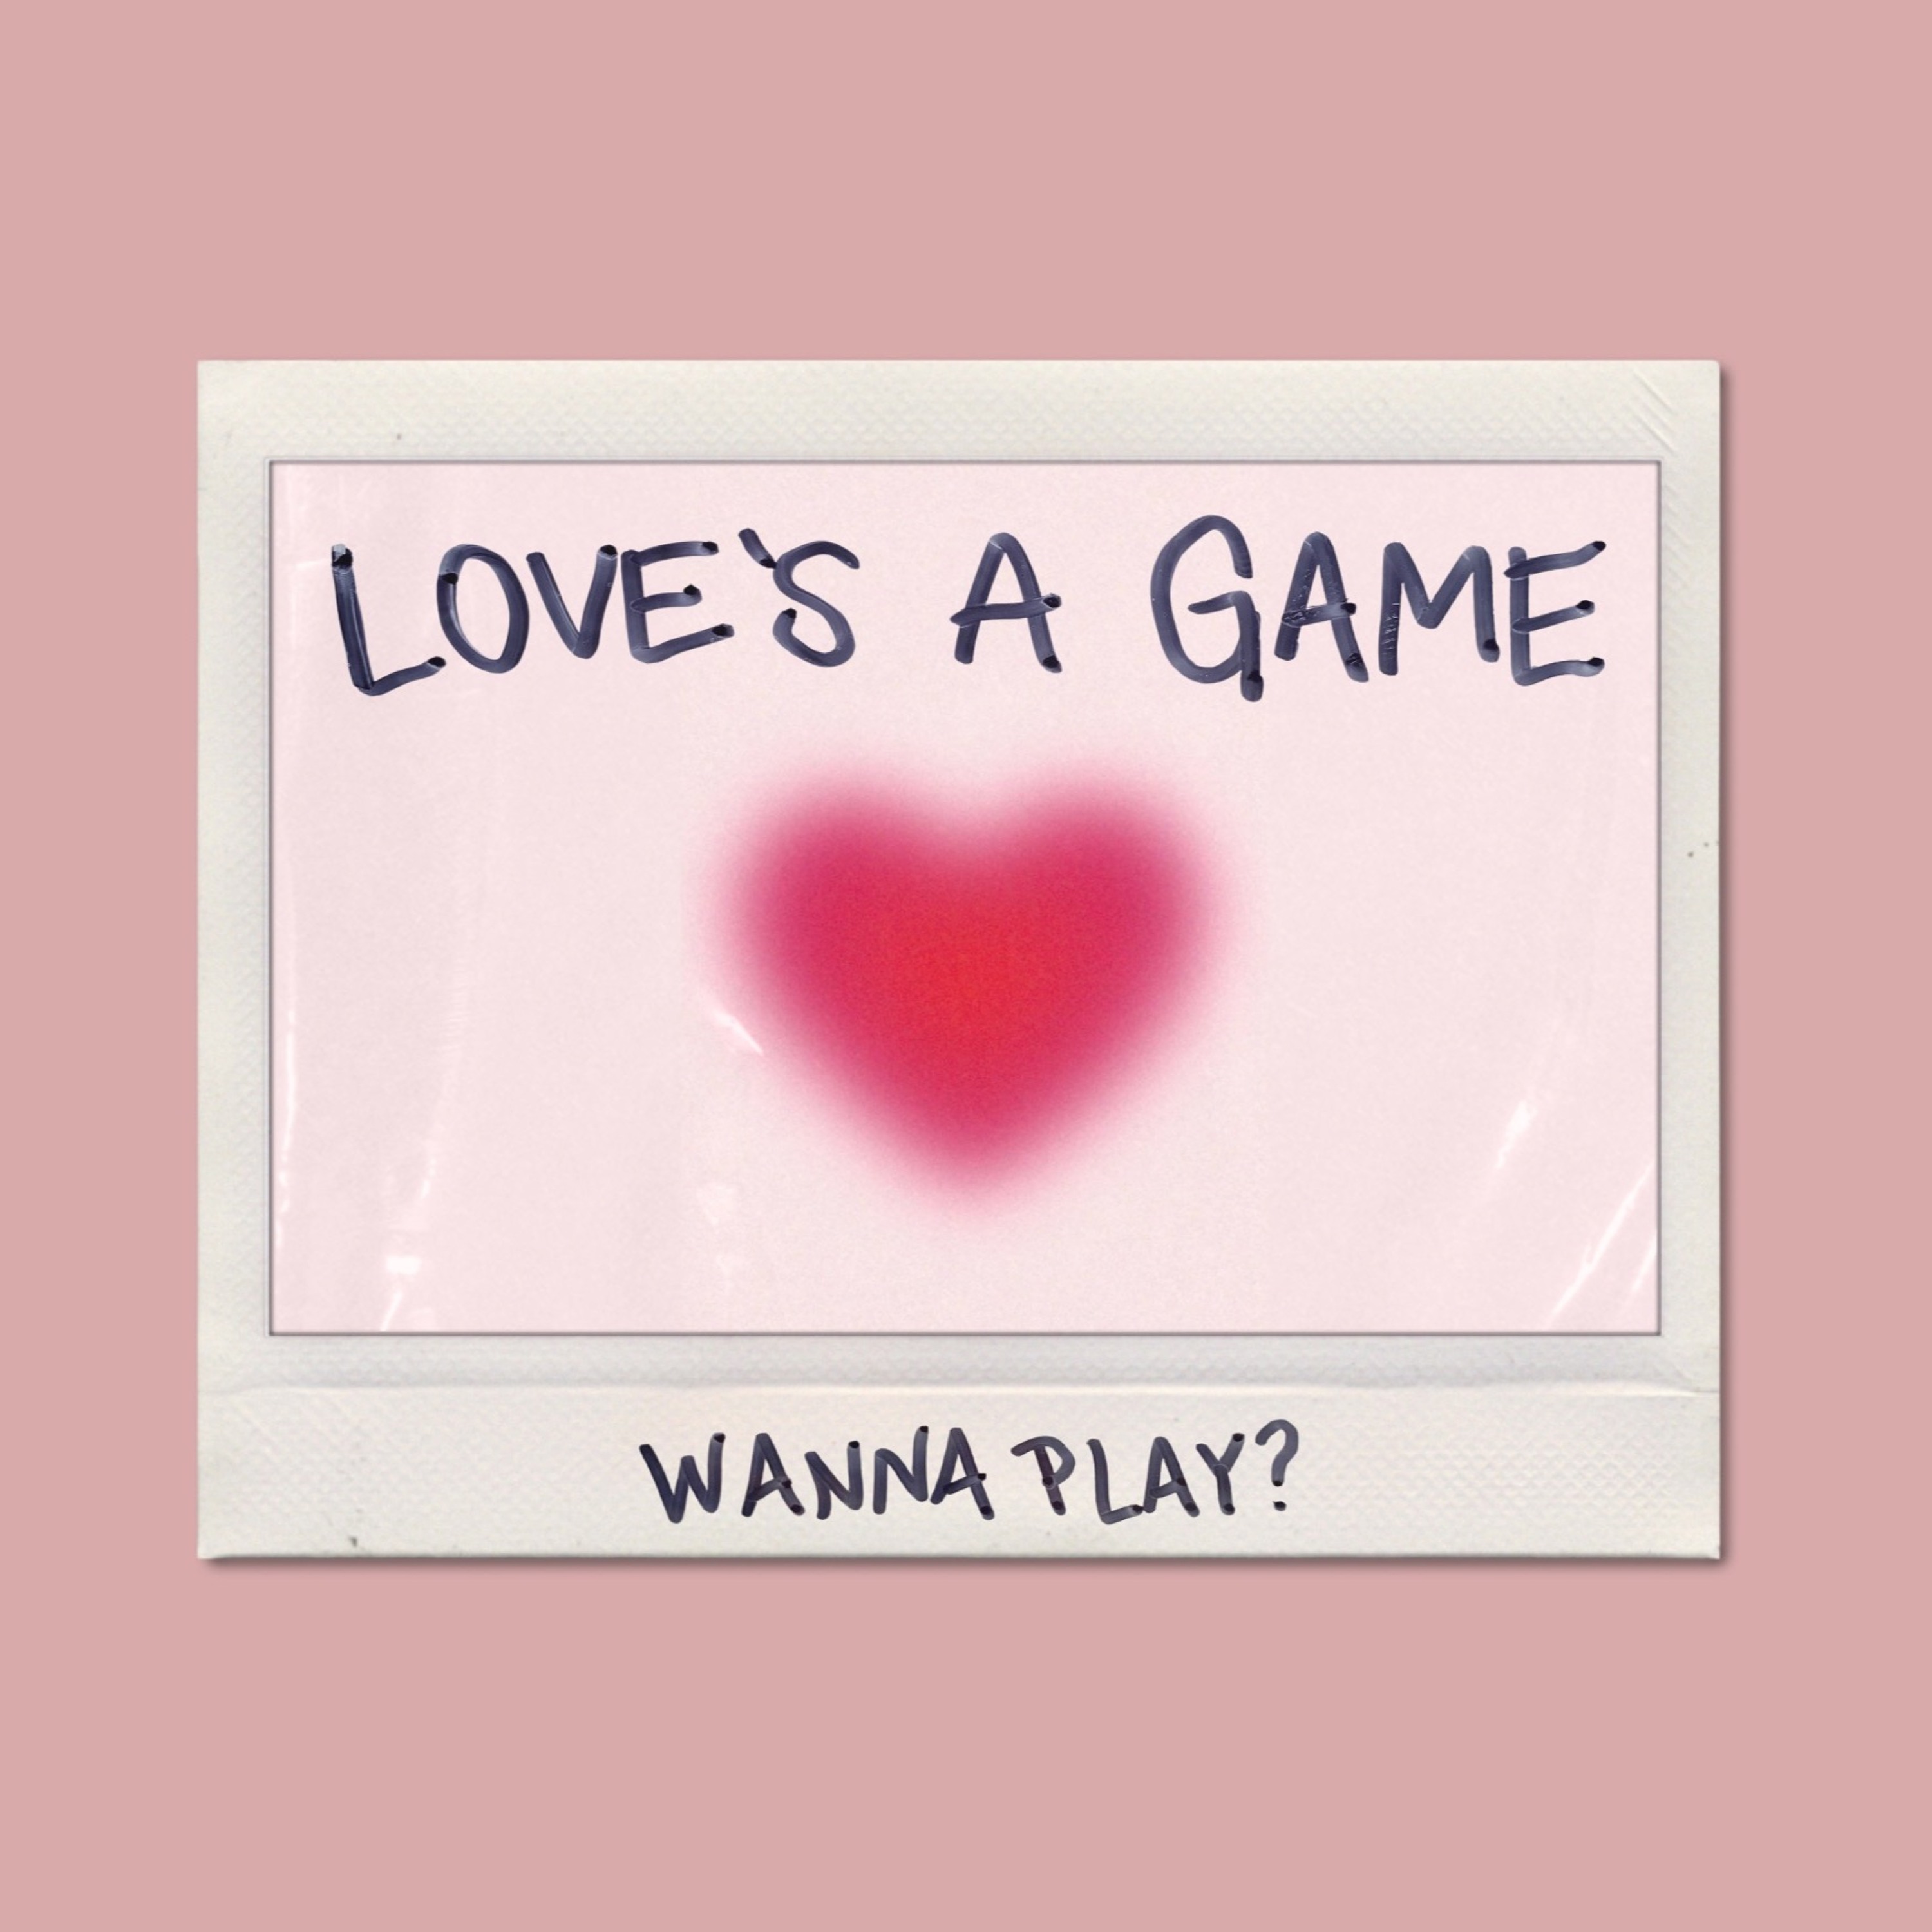 Love's a Game: Wanna Play? - Winning the Game | Derek Quinby